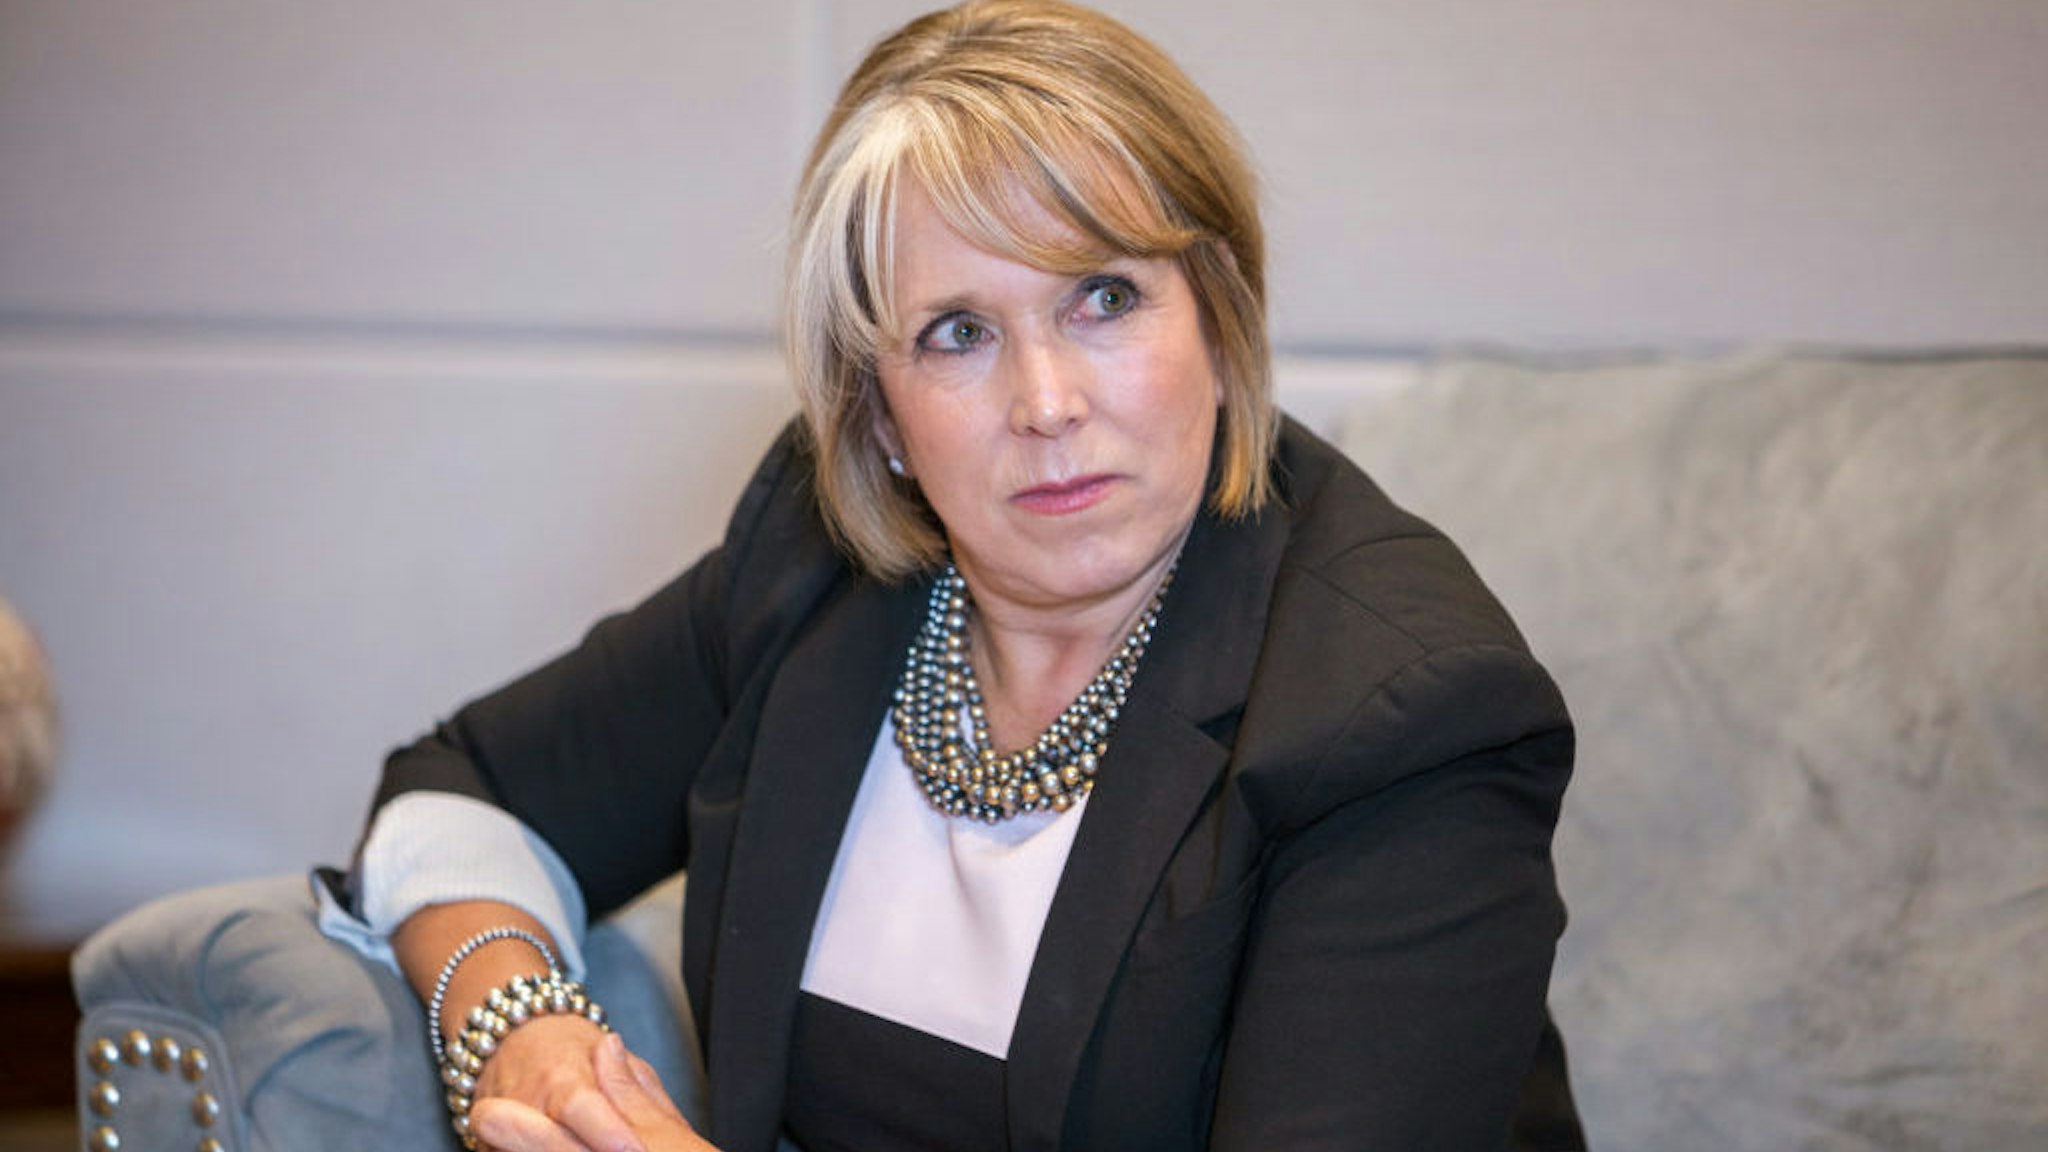 Michelle Lujan Grisham, governor of New Mexico, listens during an interview at her office in Santa Fe, New Mexico, U.S., on Thursday, Aug. 8, 2019. Lujan Grisham is balancing her concern over the catastrophic effects of climate change with the state's extraordinary dependence on oil and gas. Photographer: Steven St John/Bloomberg